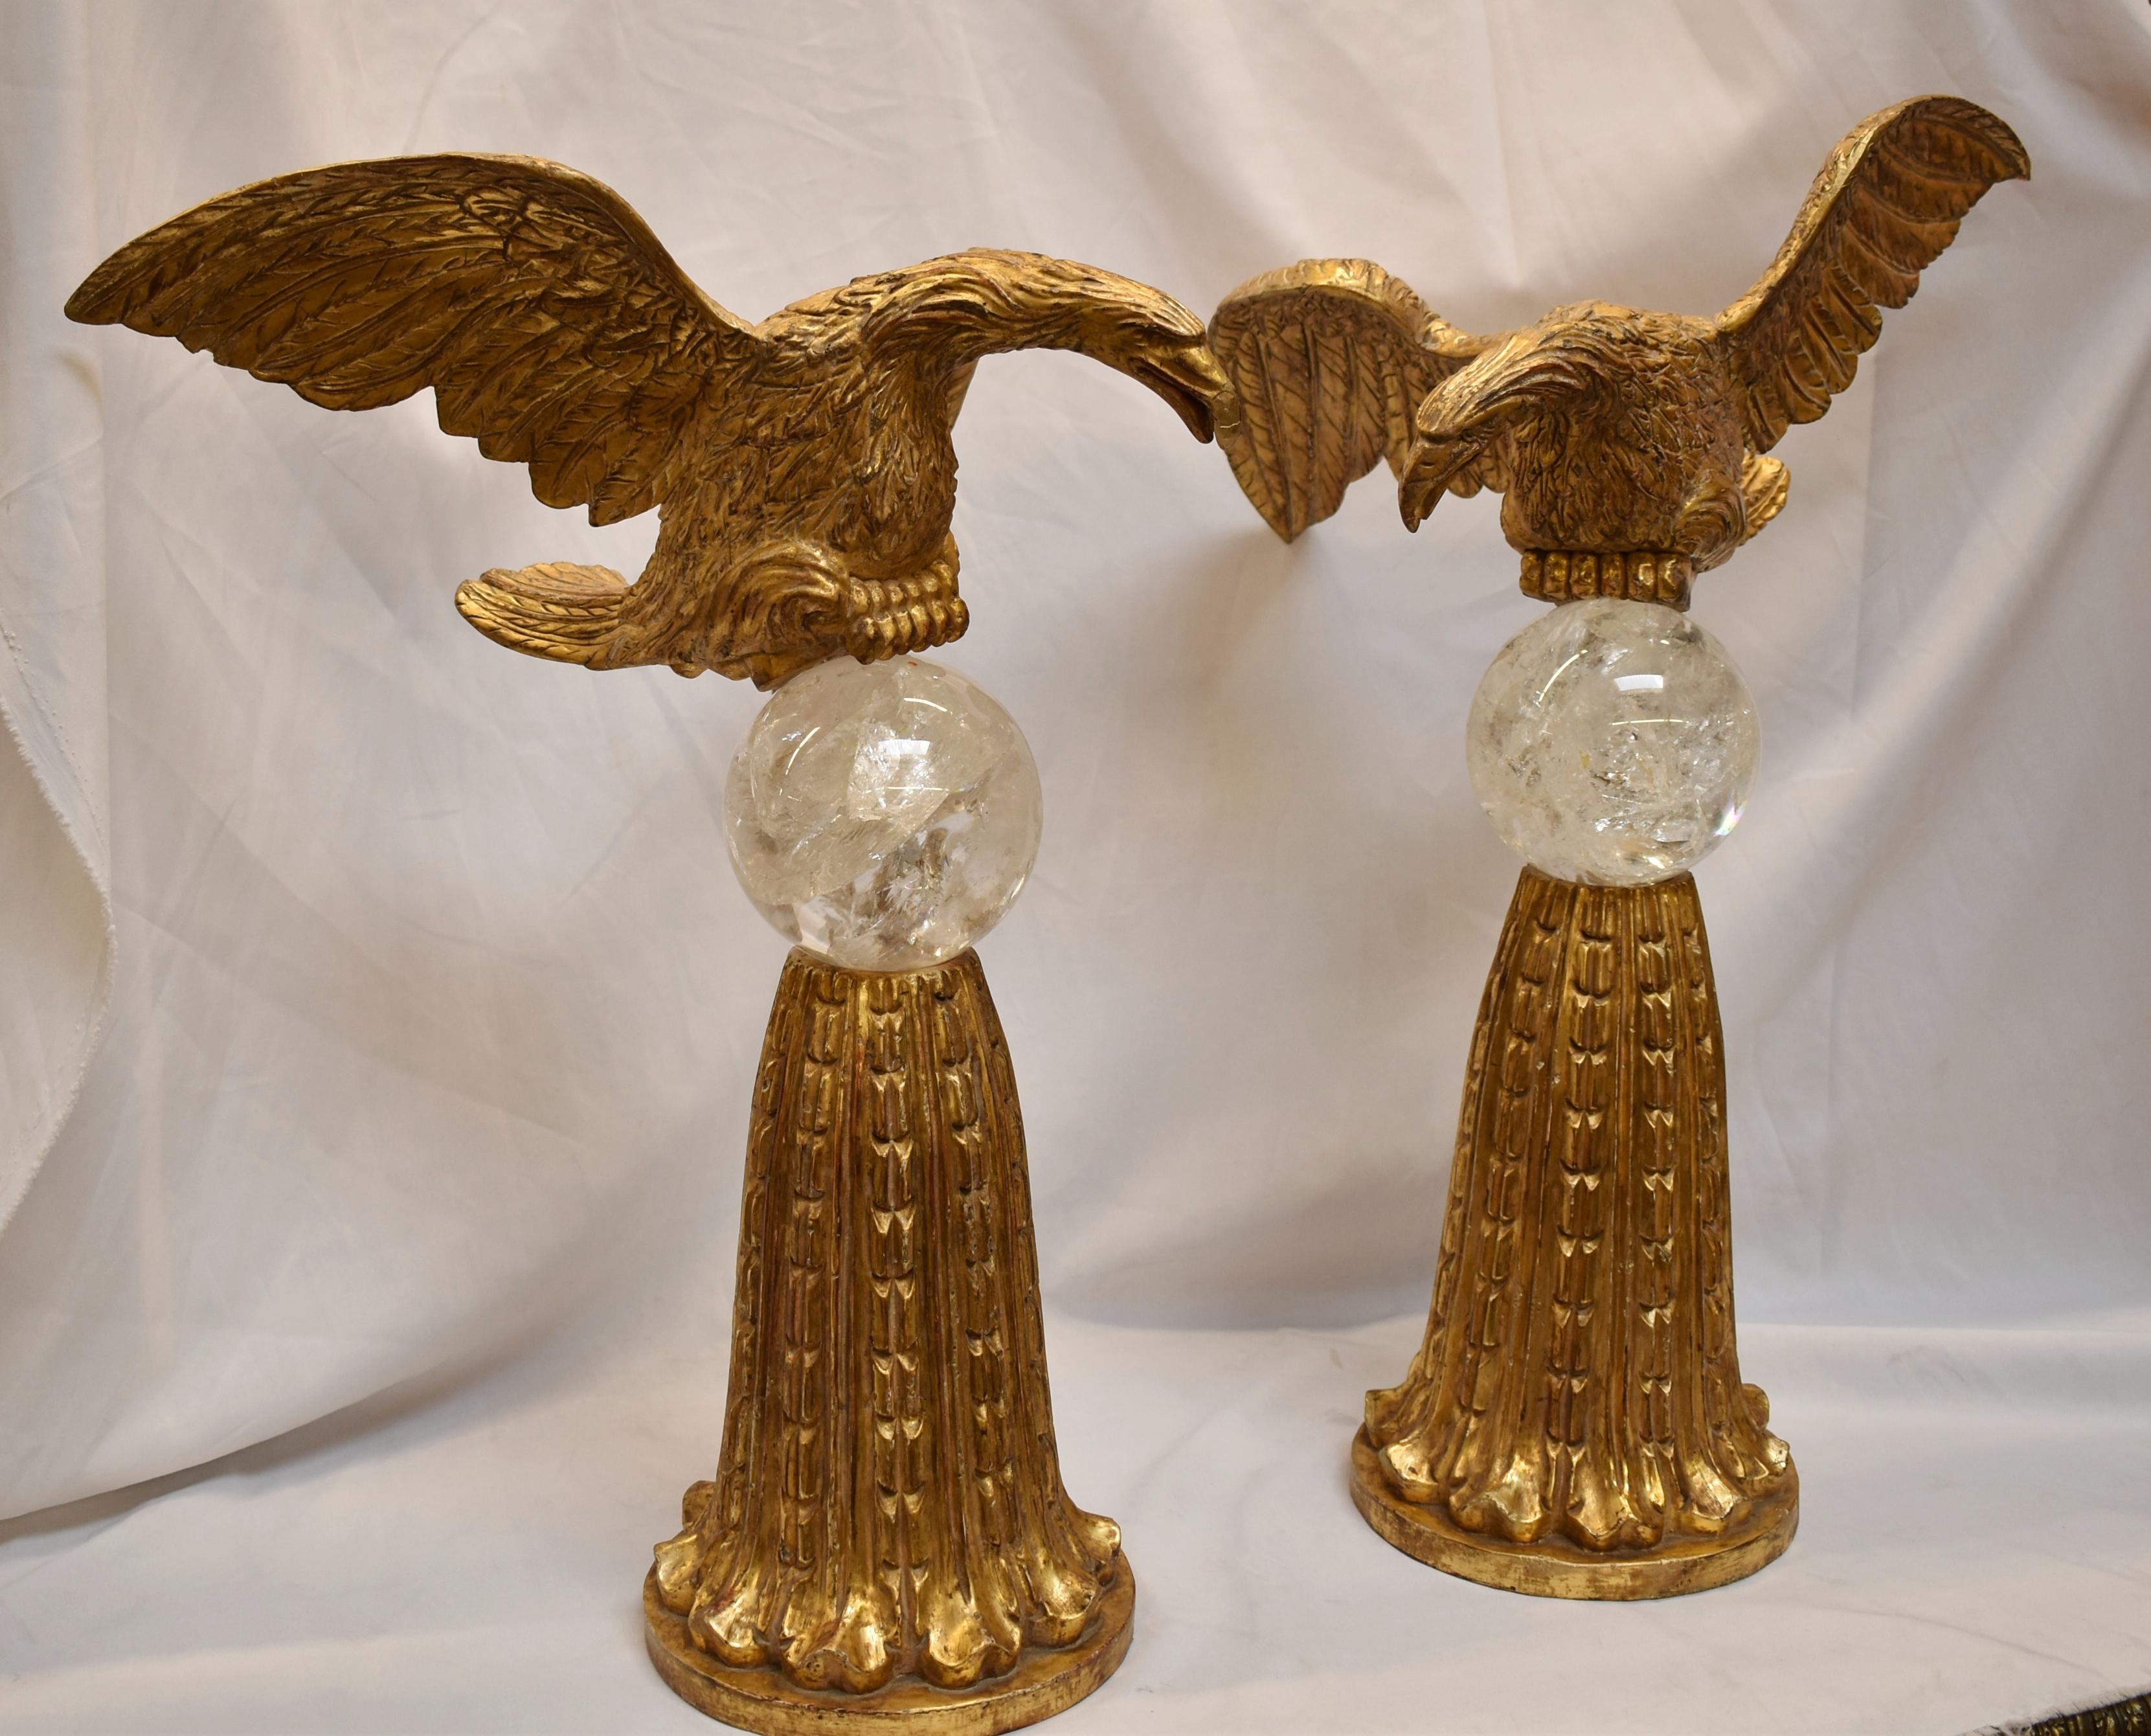 Pair of Eagles on Rock Crystal Spheres In Good Condition For Sale In Cypress, CA